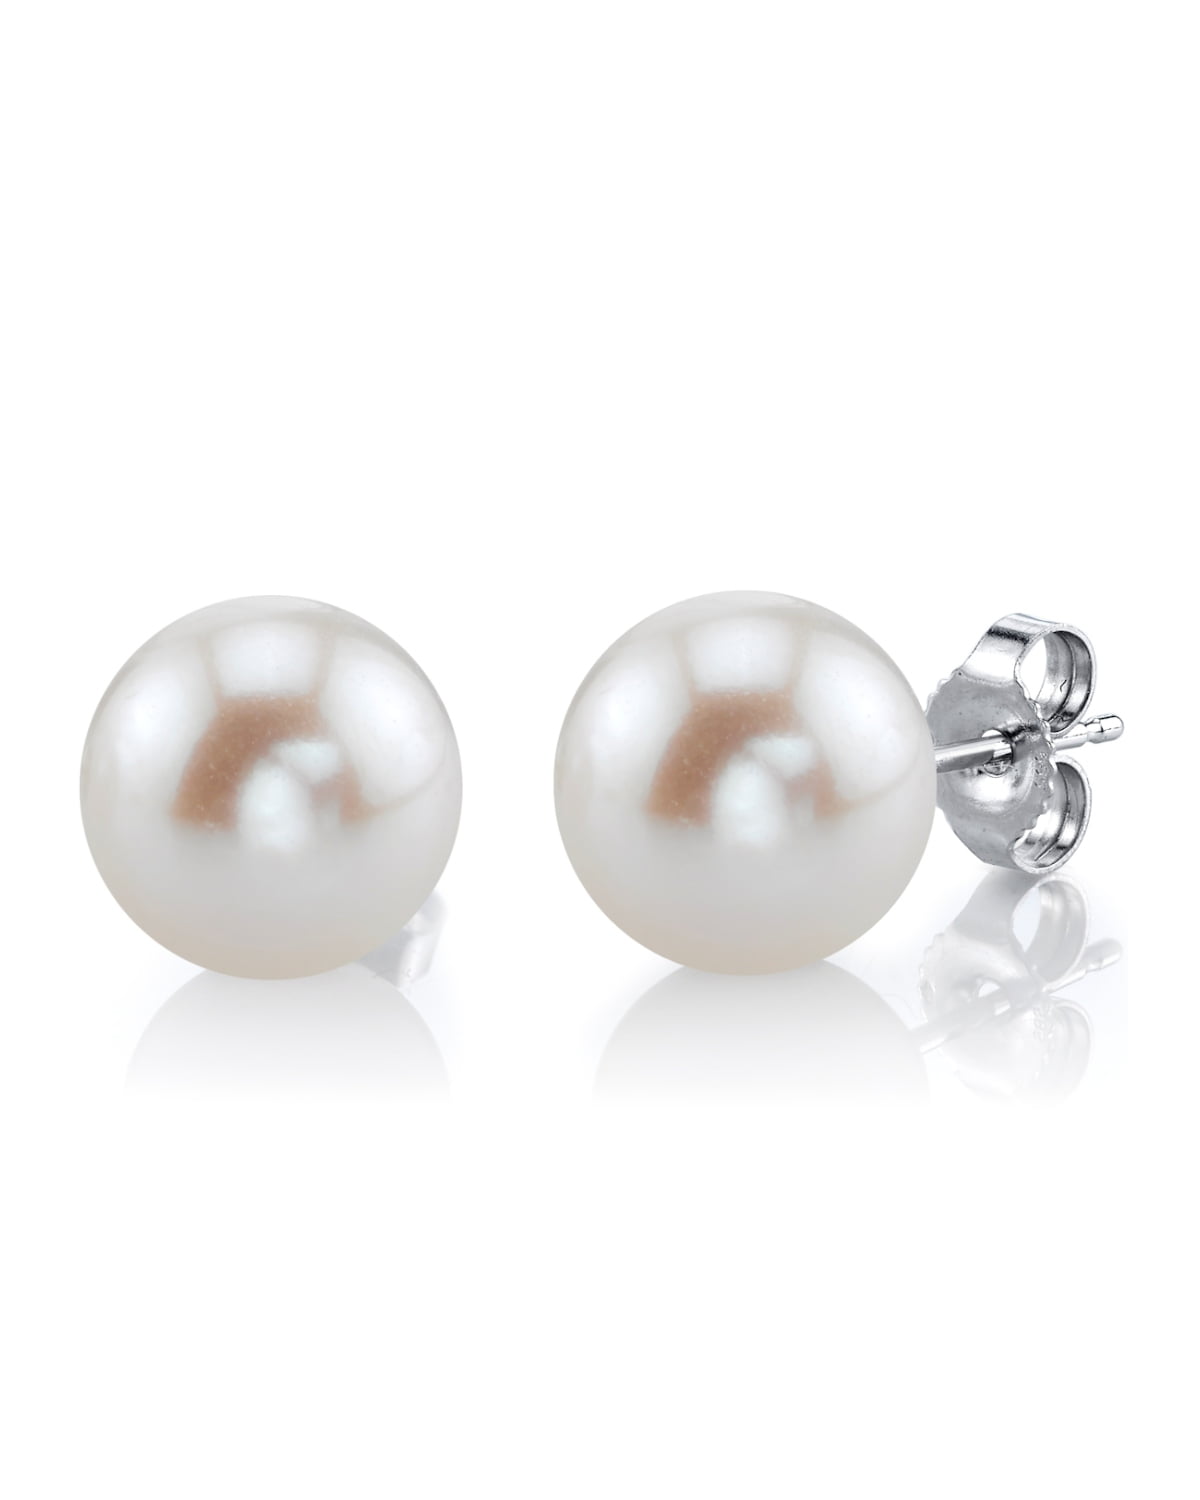 14K Gold AAA Quality Round Genuine Akoya Saltwater Cultured Pearl Leverback Earrings for Women